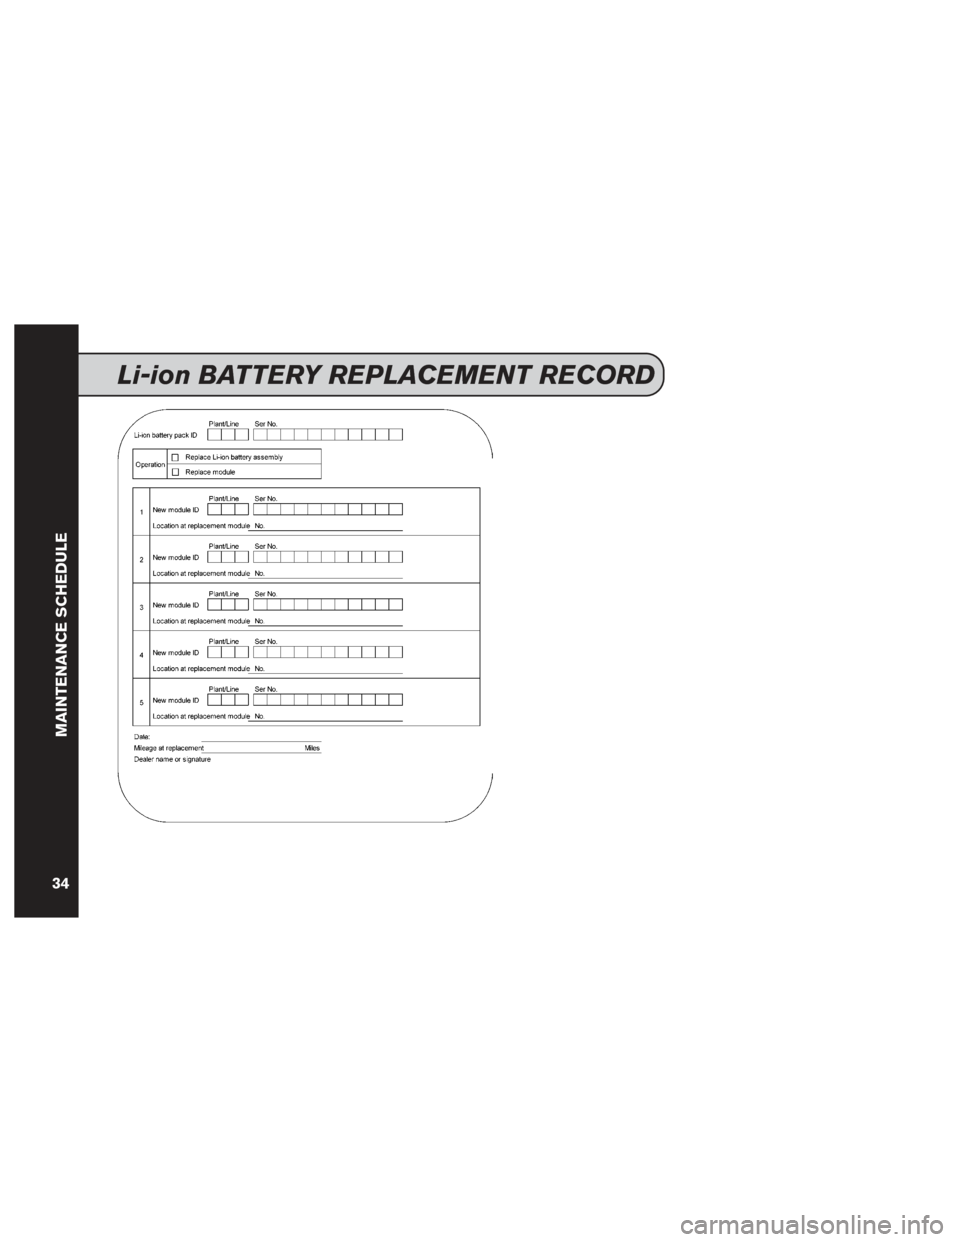 NISSAN LEAF 2016 1.G Service And Maintenance Guide Li-ion BATTERY REPLACEMENT RECORD
MAINTENANCE SCHEDULE
34 